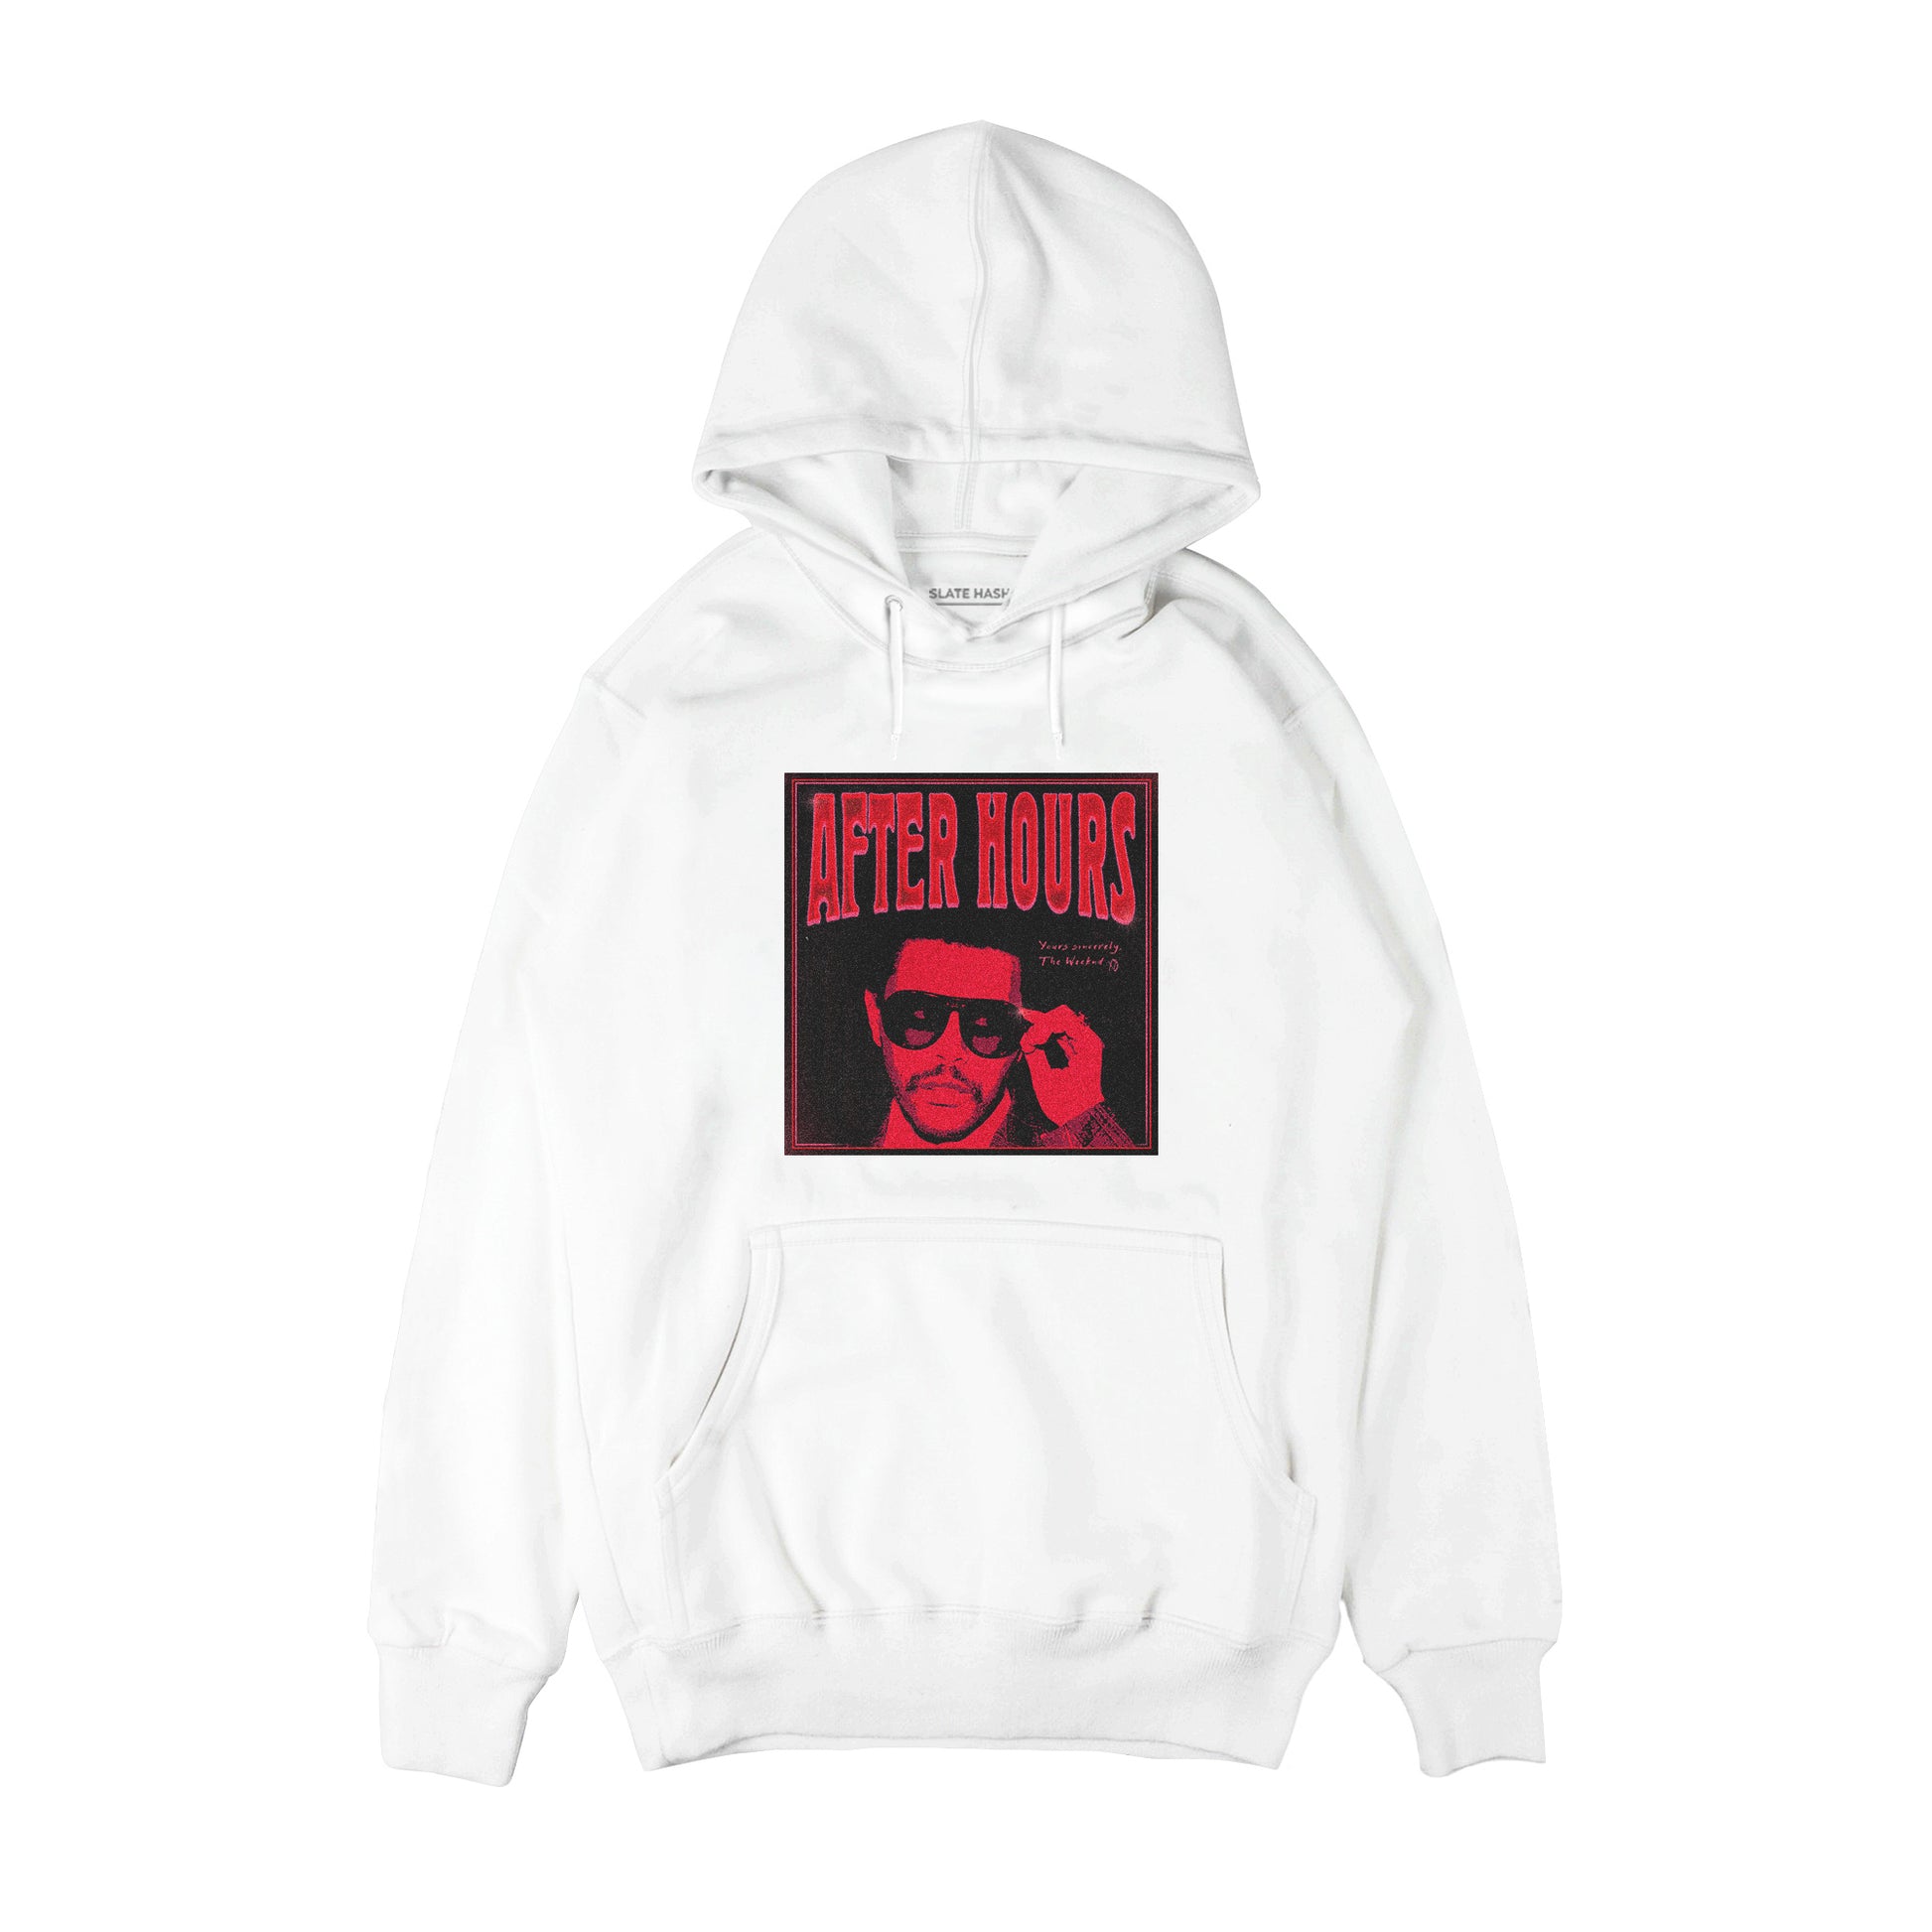 After Hours - The Weeknd Hoodie XL / Black